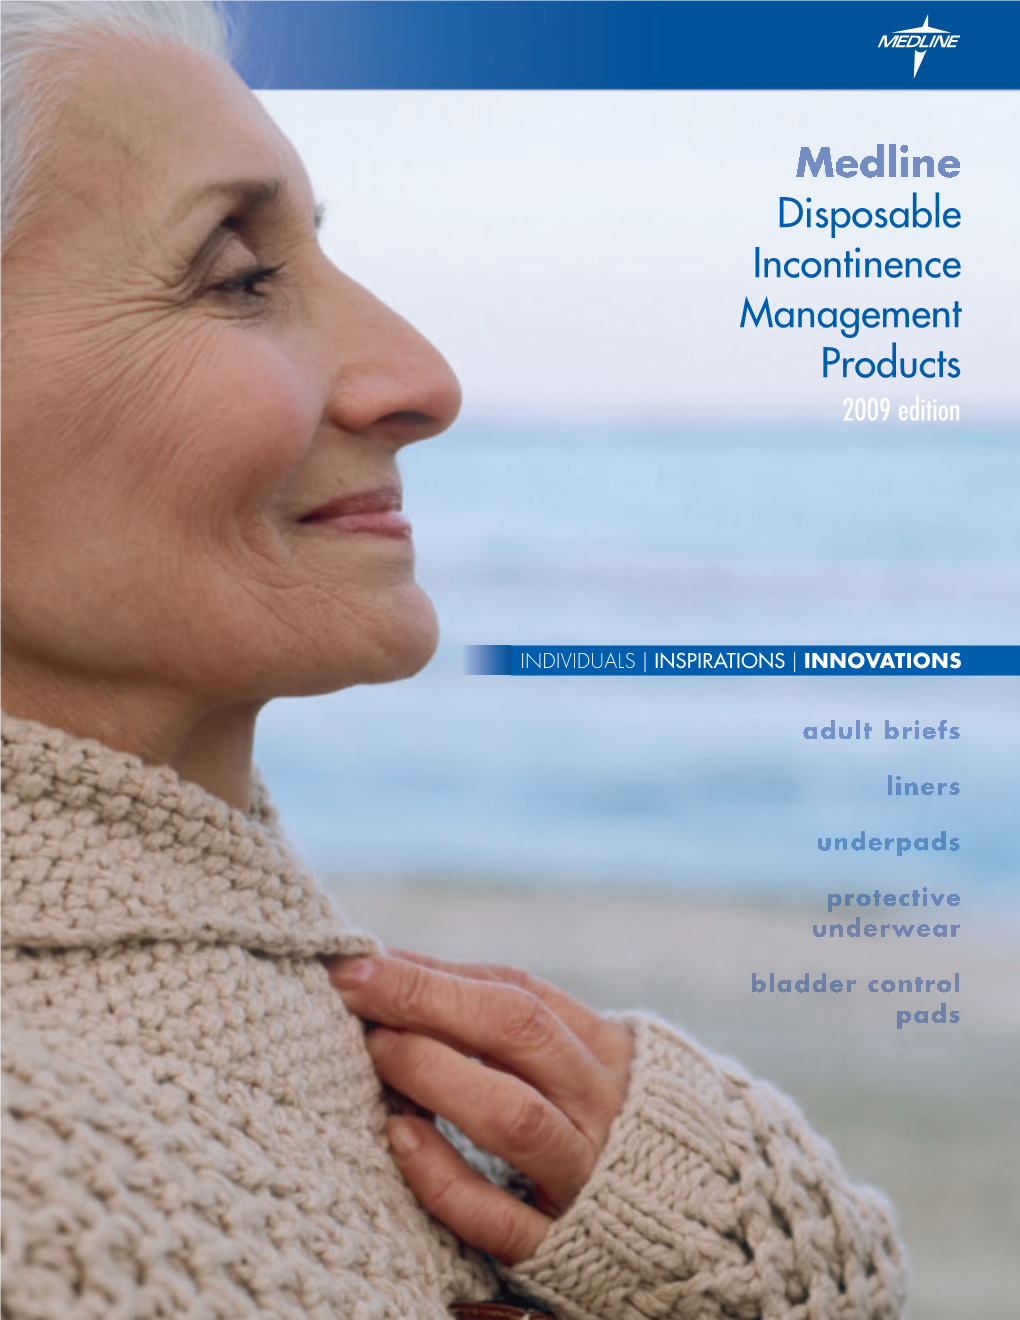 Disposable Incontinence Management Products 2009 Edition